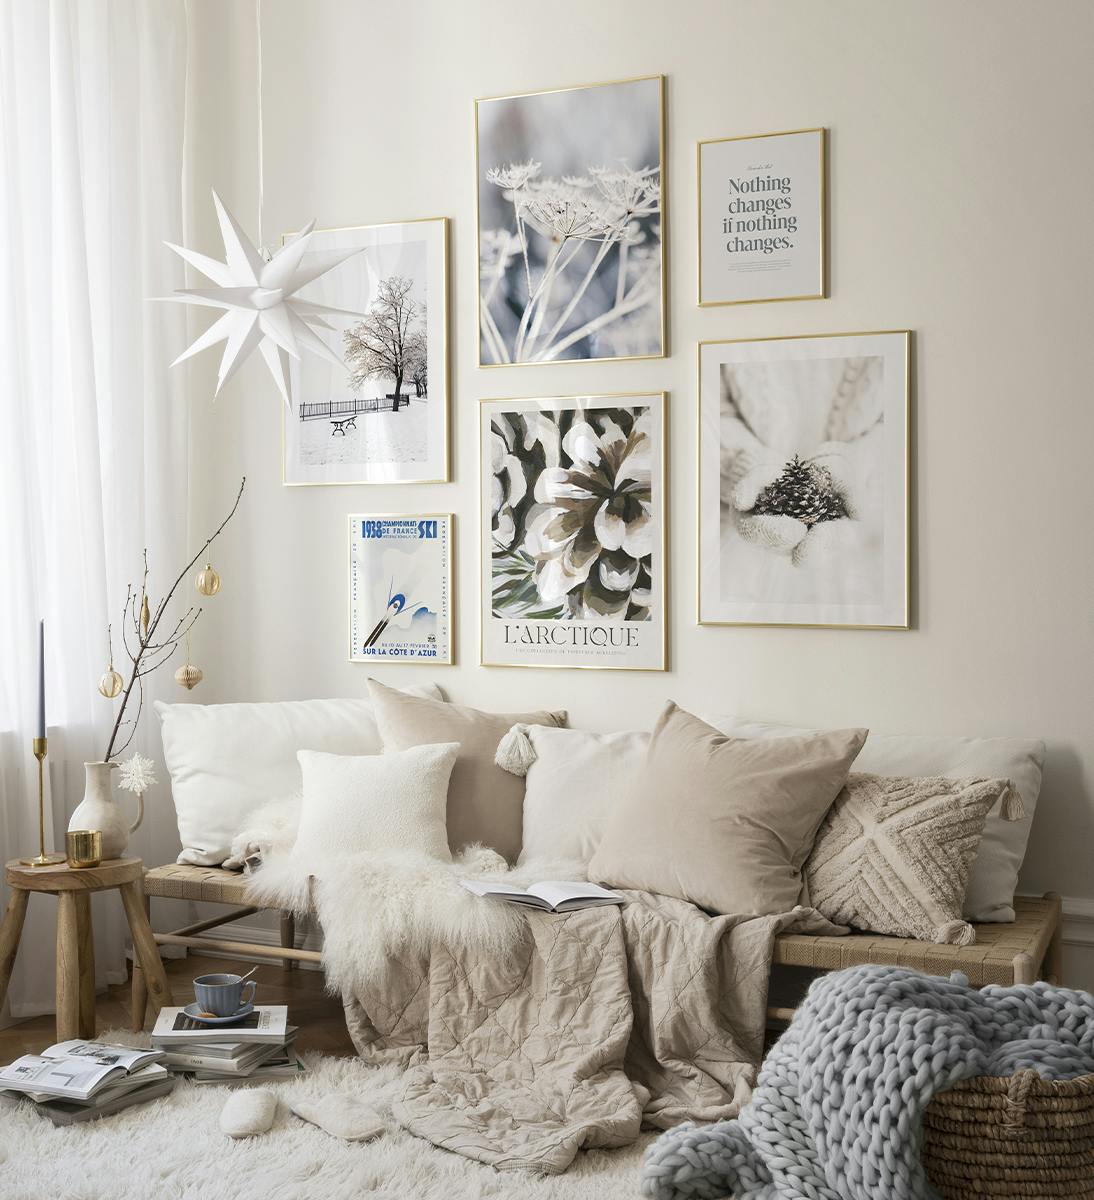 Transform your living room into a winter wonderland with this gallery wall in white and beige tones with gold frames.